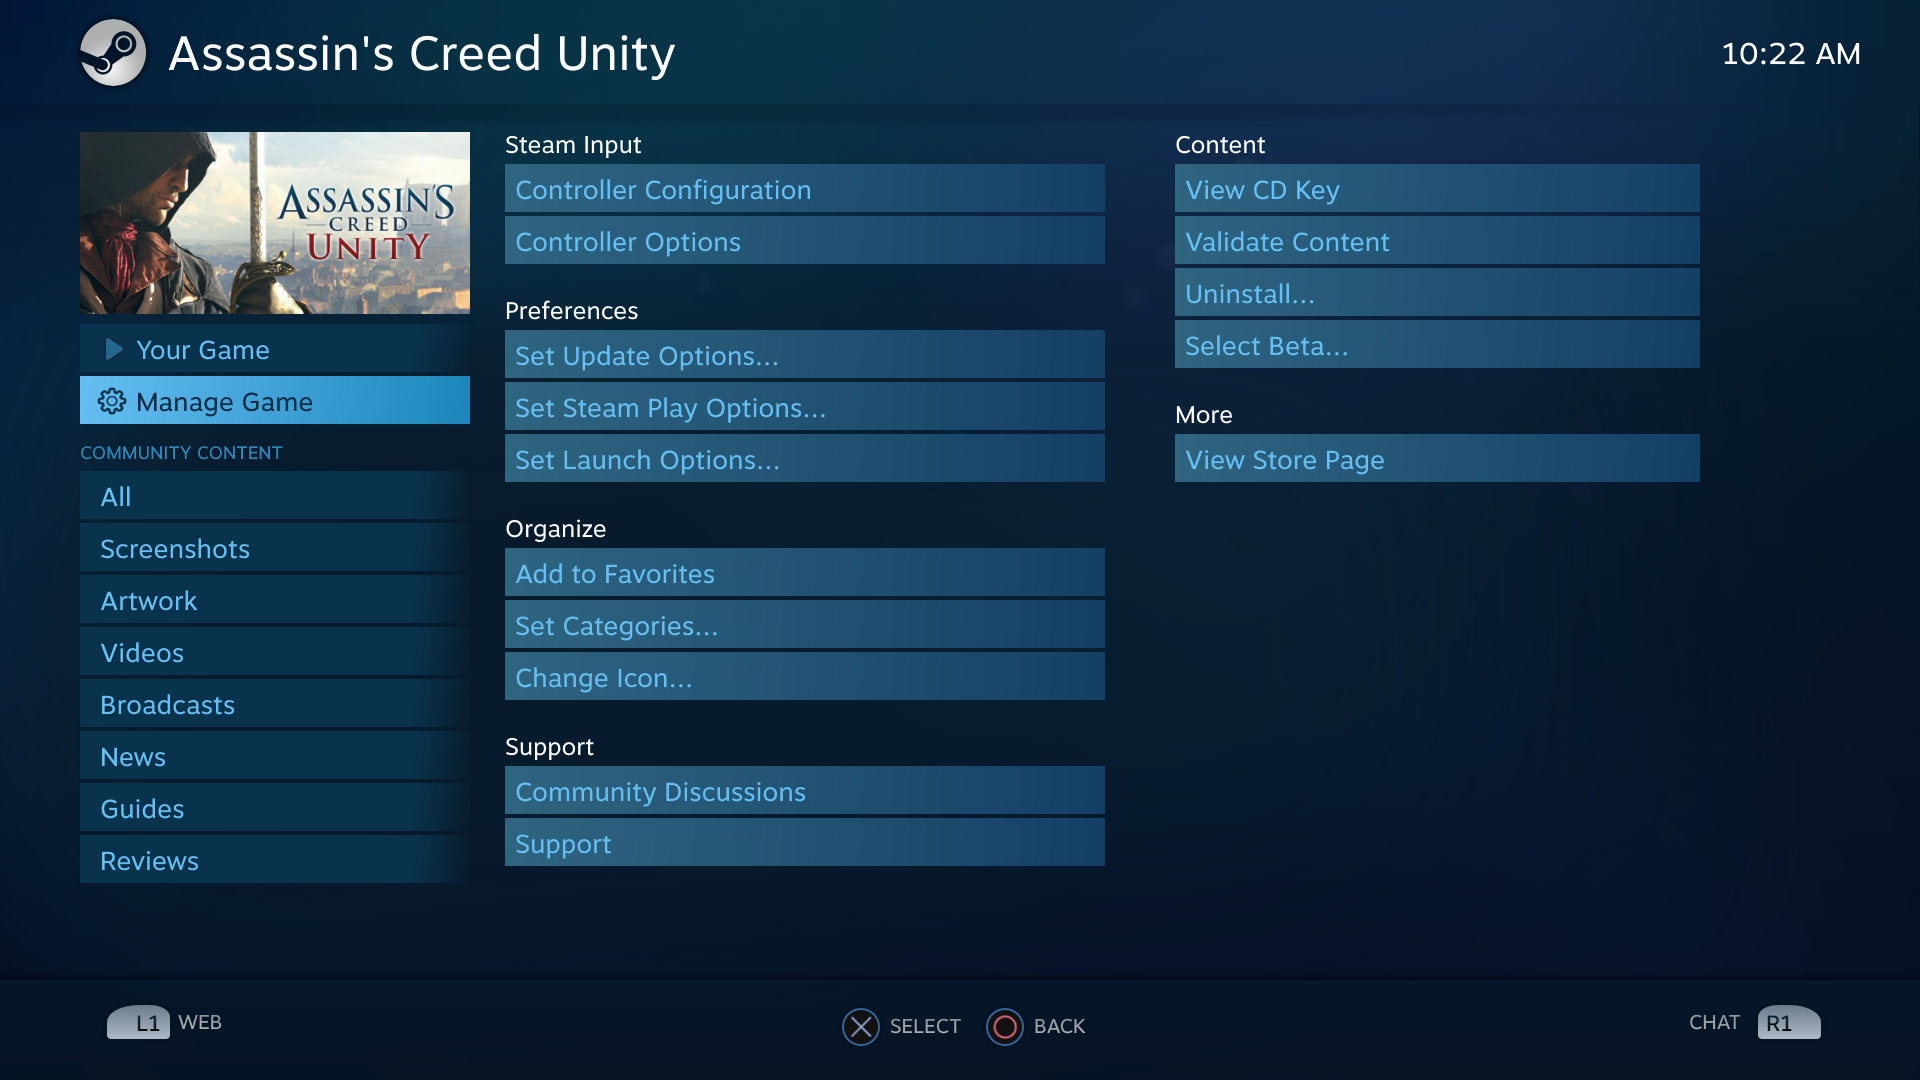 Assassin's Creed Unity Playstation Button Prompts with DS4 v2 Controller - Step 1: Disabling Steam Input - F405664